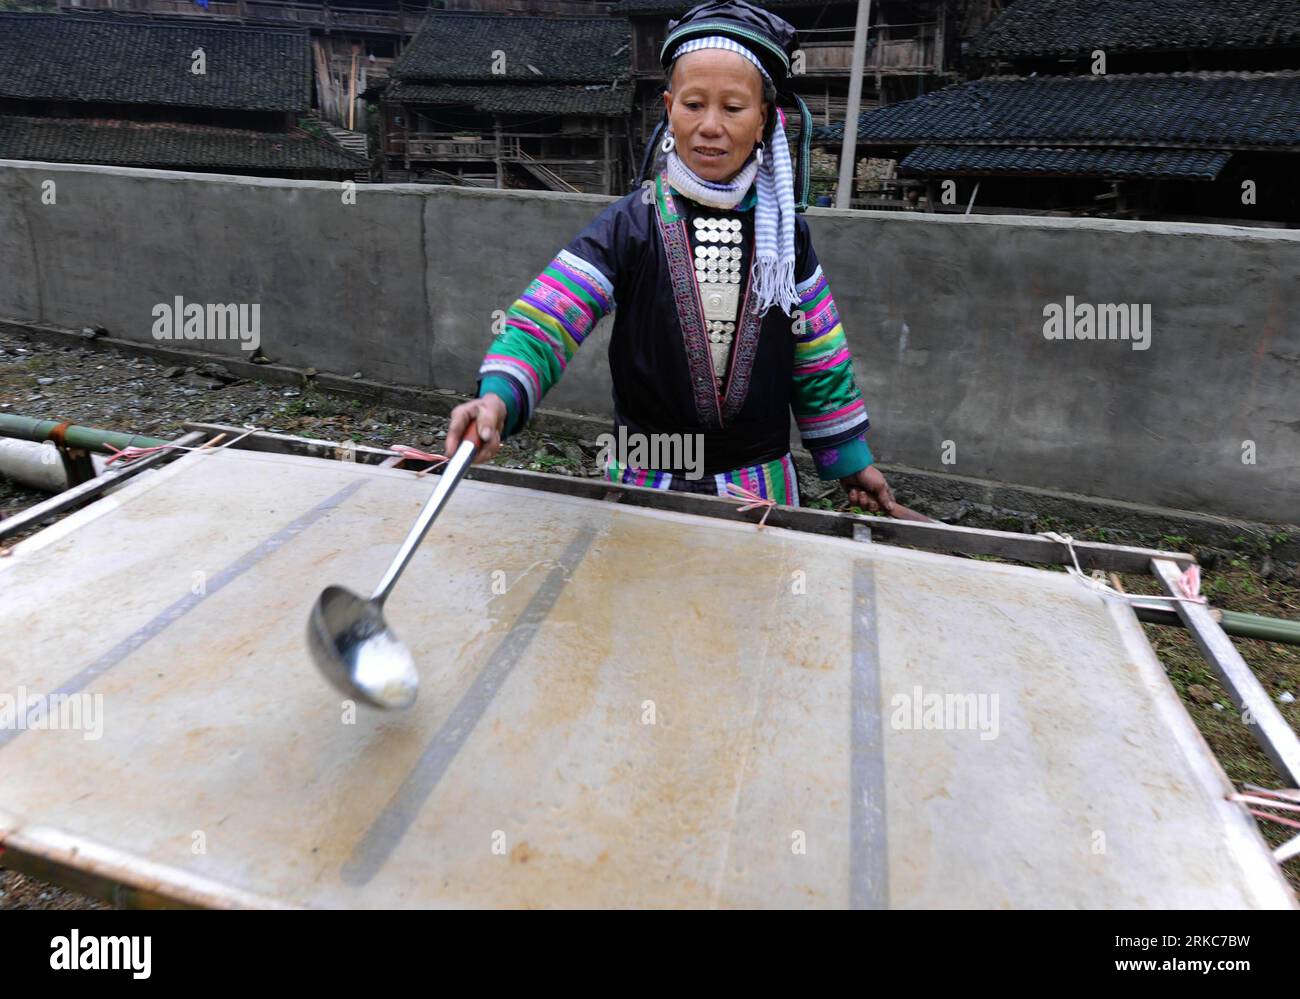 Bildnummer: 54686066  Datum: 30.11.2010  Copyright: imago/Xinhua (101130) -- QIANDONGNAN, Nov. 30, 2010 (Xinhua) -- A woman of Yao ethnic group shows handmade paper process in Gaohua village of Congjiang County, southwest China s Guizhou Province, Nov. 30, 2010. Local Yao used straw and wood to make paper of daily use. The ancient paper making skill was well-reserved. (Xinhua/Lai Liusheng) (cxy) CHINA-GUIZHOU-CONGJIANG-PAPER MAKING (CN) PUBLICATIONxNOTxINxCHN Gesellschaft Land Leute kbdig xkg 2010 quer  o0 Tradition, Handwerk, Papier, Herstellung    Bildnummer 54686066 Date 30 11 2010 Copyrigh Stock Photo